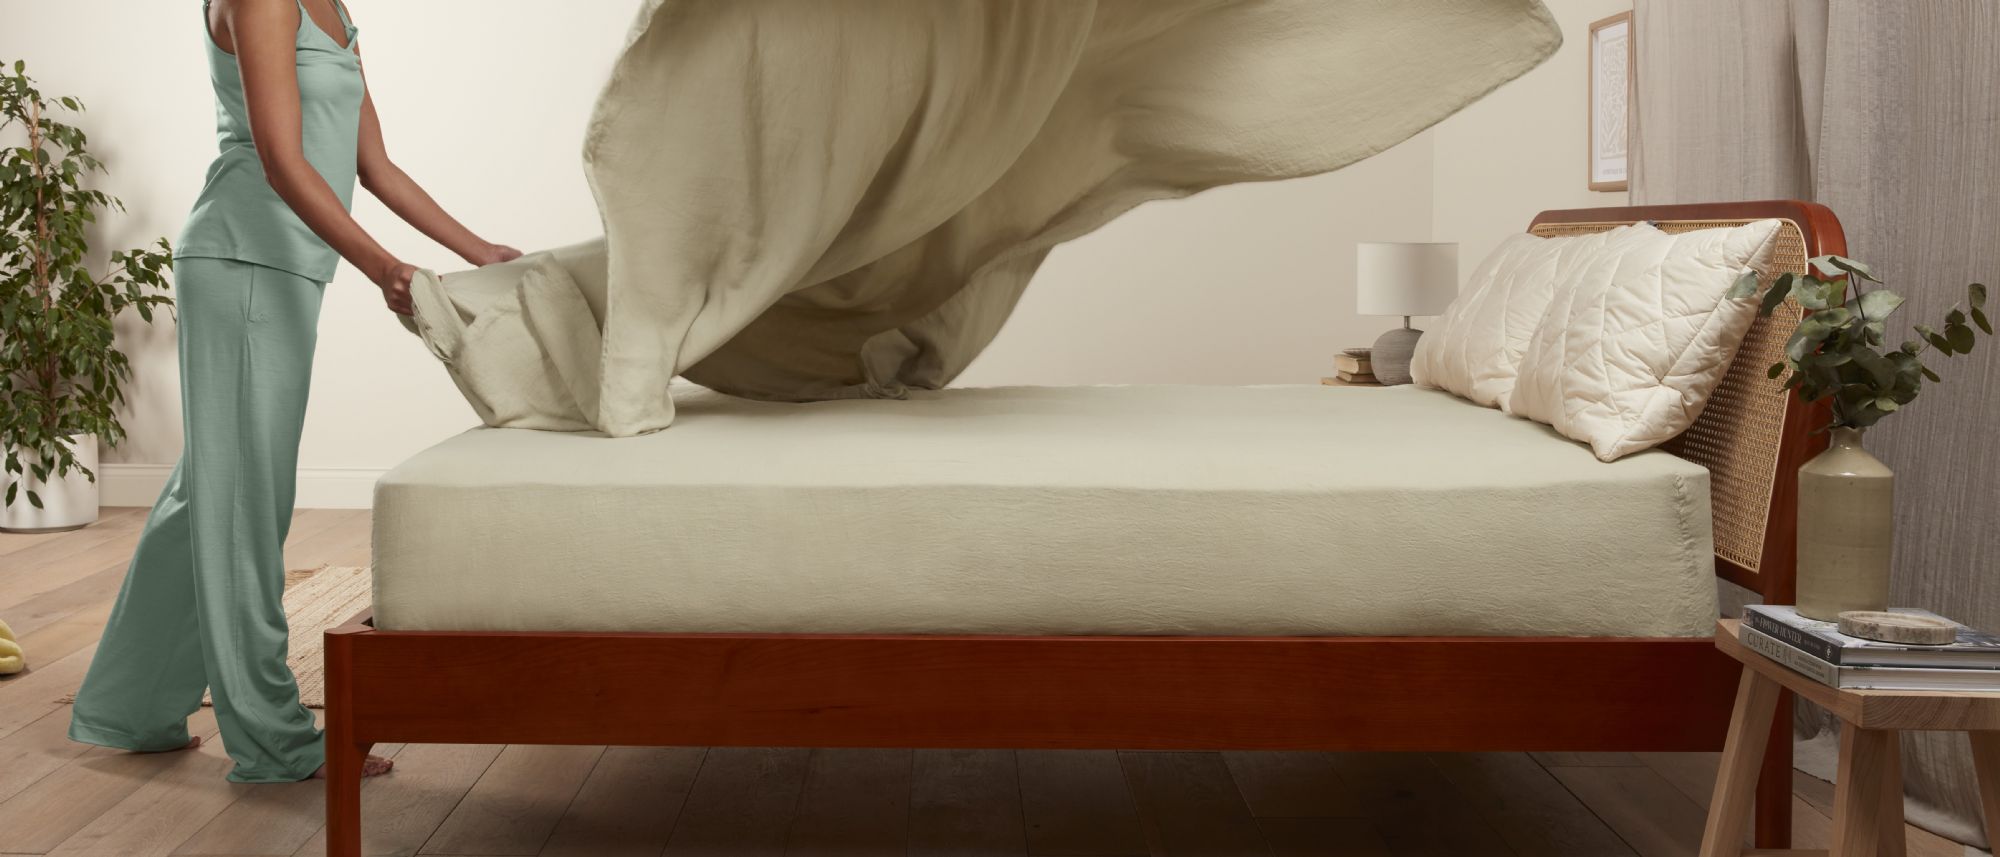 The Most Environmentally Sustainable Bedding (and why it matters